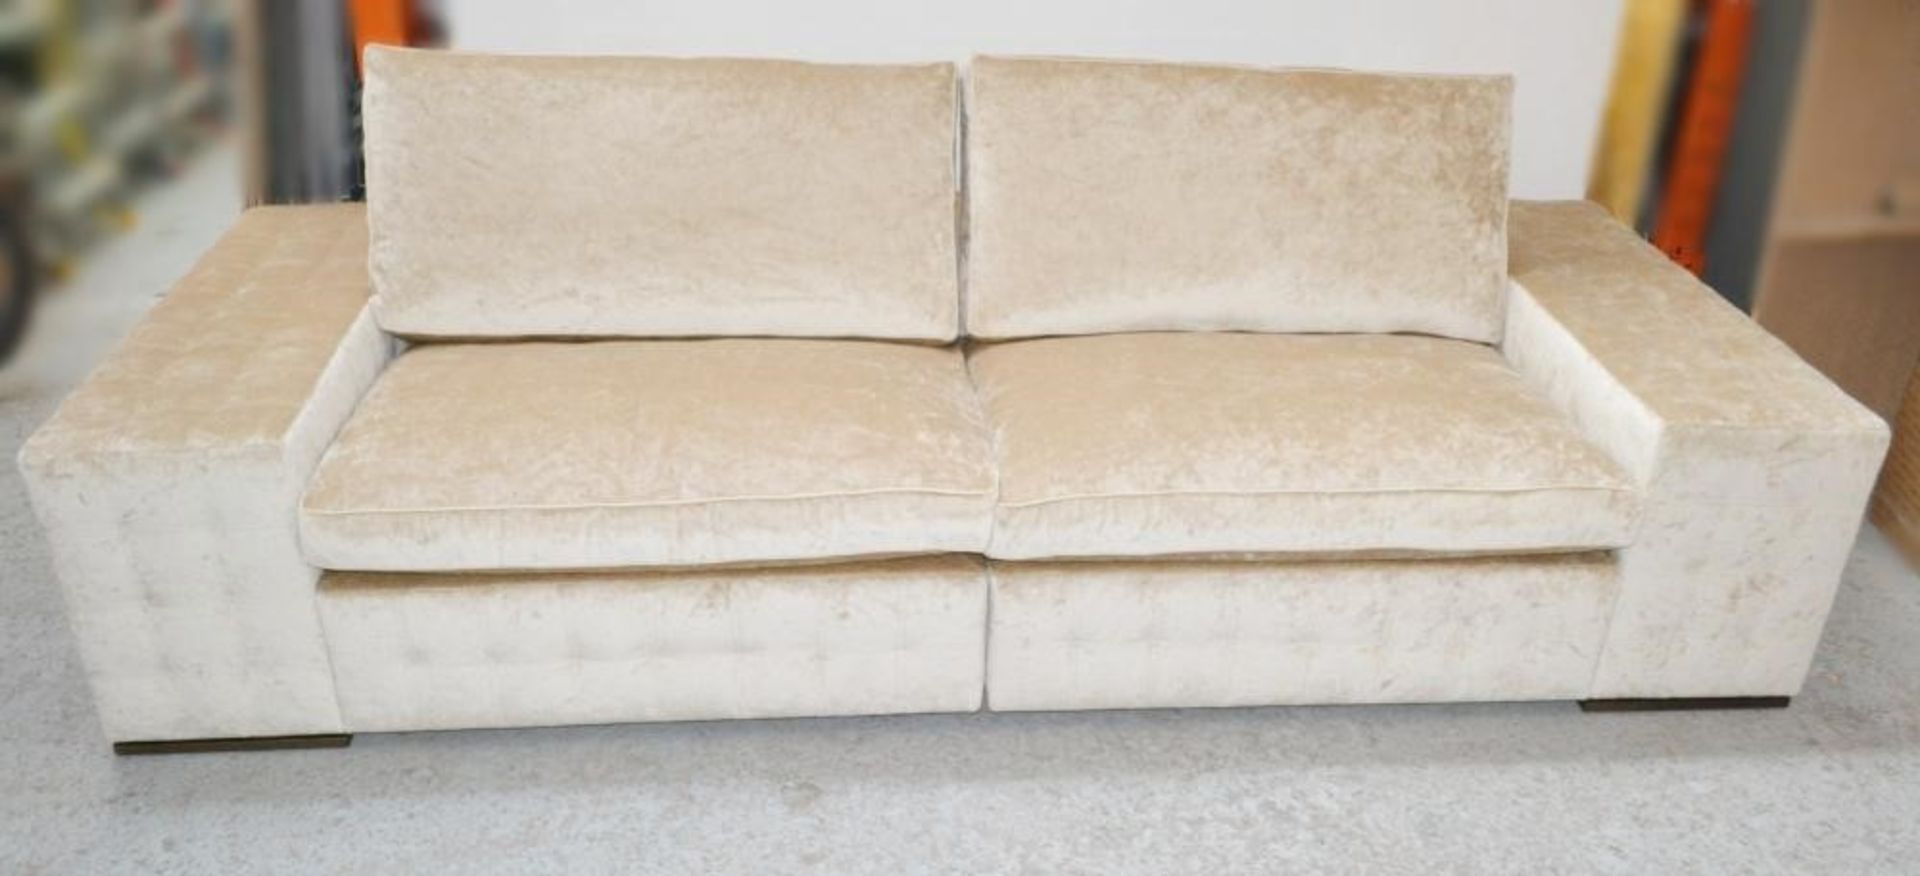 1 x GIORGIO "Sayonara" 3-Seater Sofa In An Opulent Champagne Chenille Upholstery - Ref: 4711347 NP1/ - Bild 3 aus 8